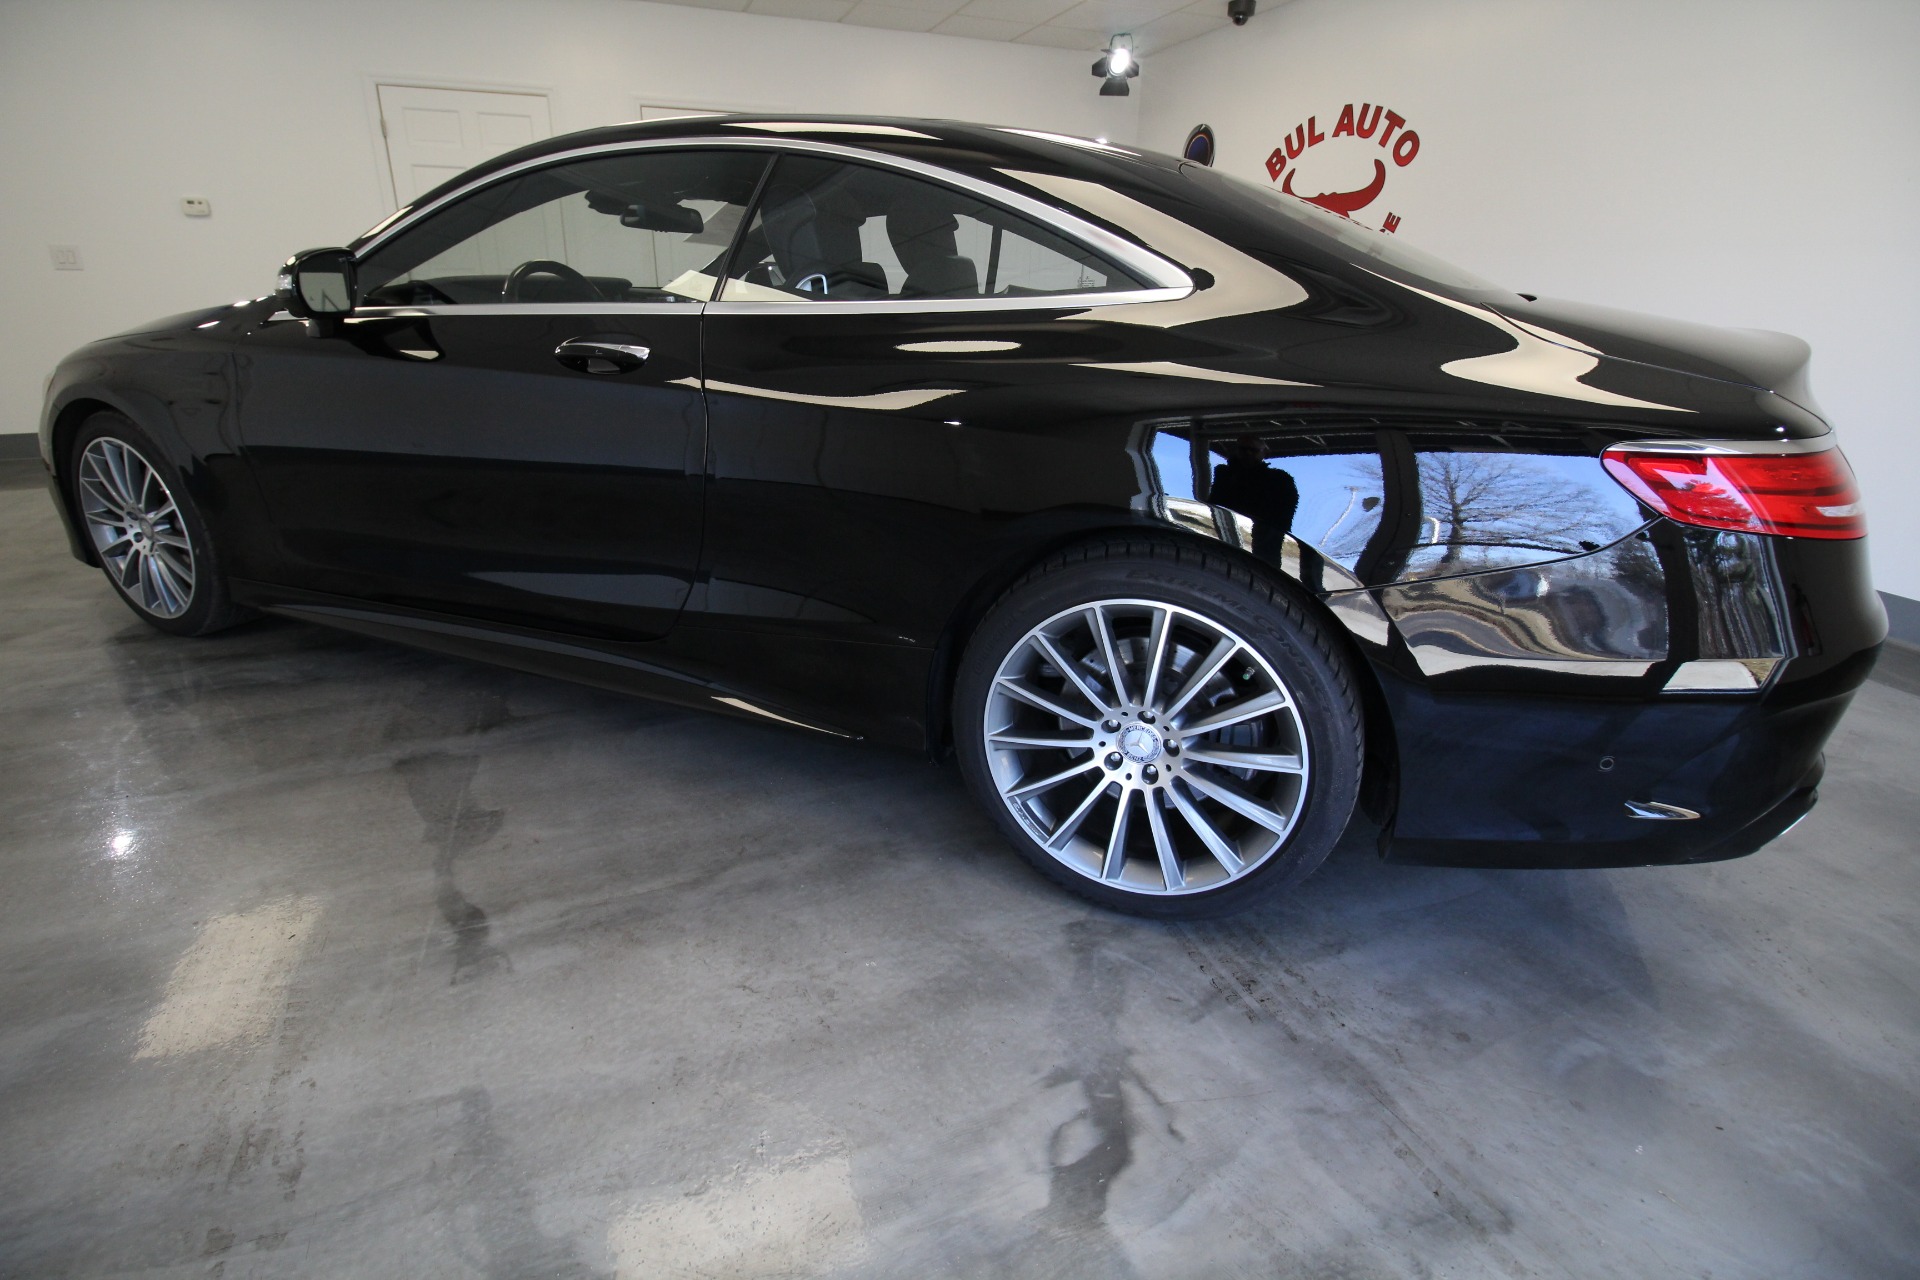 Used 2016 Black Mercedes-Benz S-Class S550 4MATIC Coupe | Albany, NY